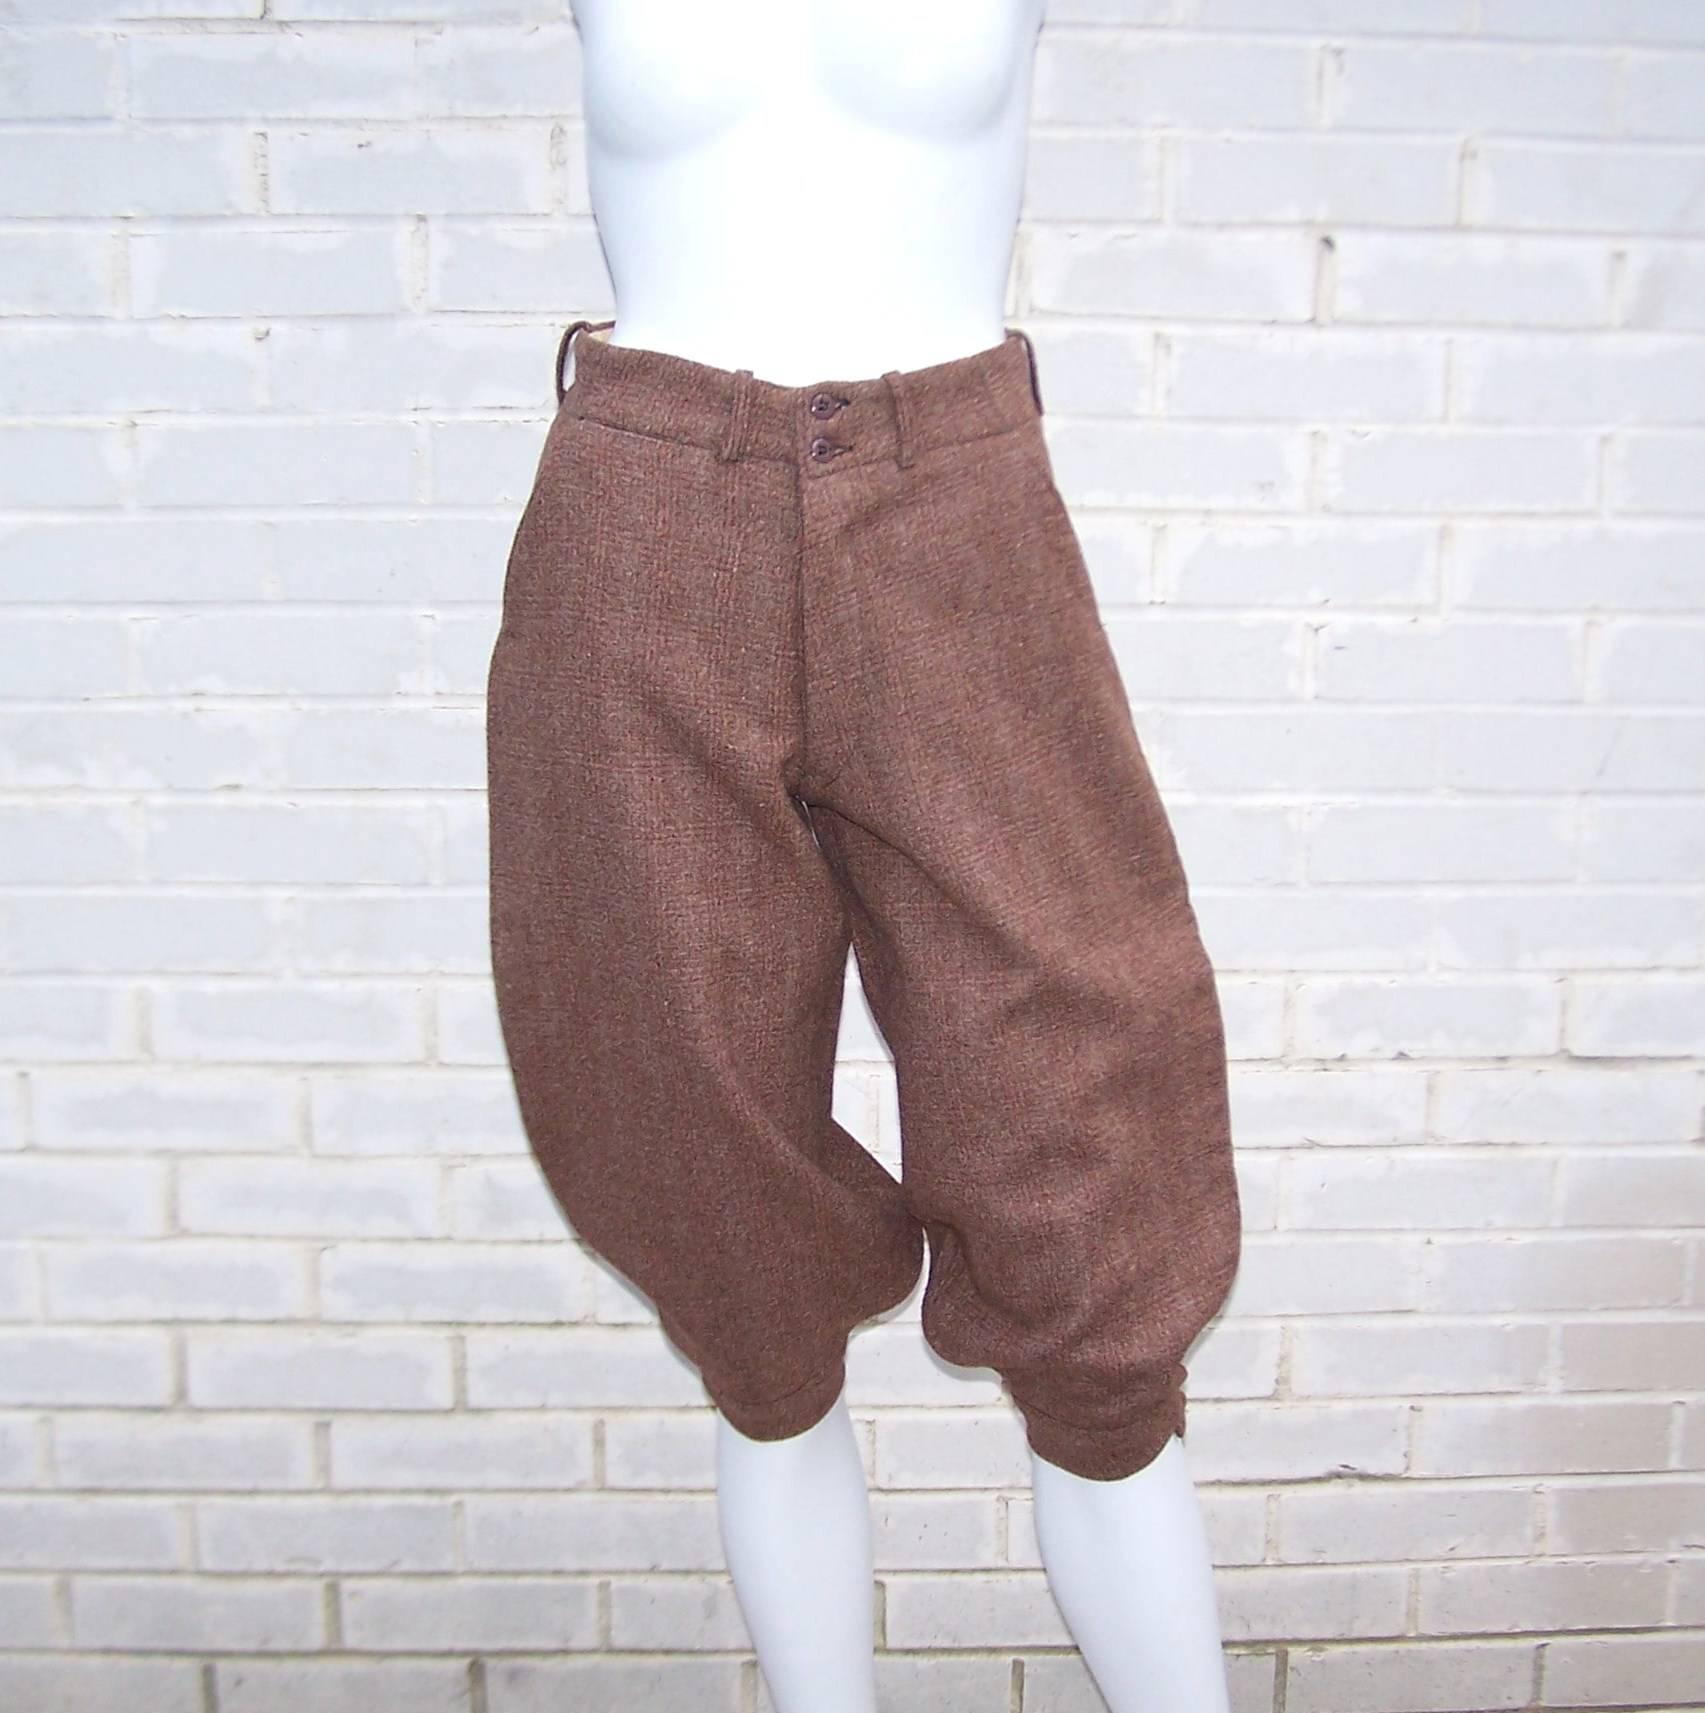 If Annie Hall was going to wear knickers...this would be the pair!  These 1930's short pants were probably intended for riding or other sporting activities.  They are made from a reddish-brown wool tweed with front and back pockets.  The button